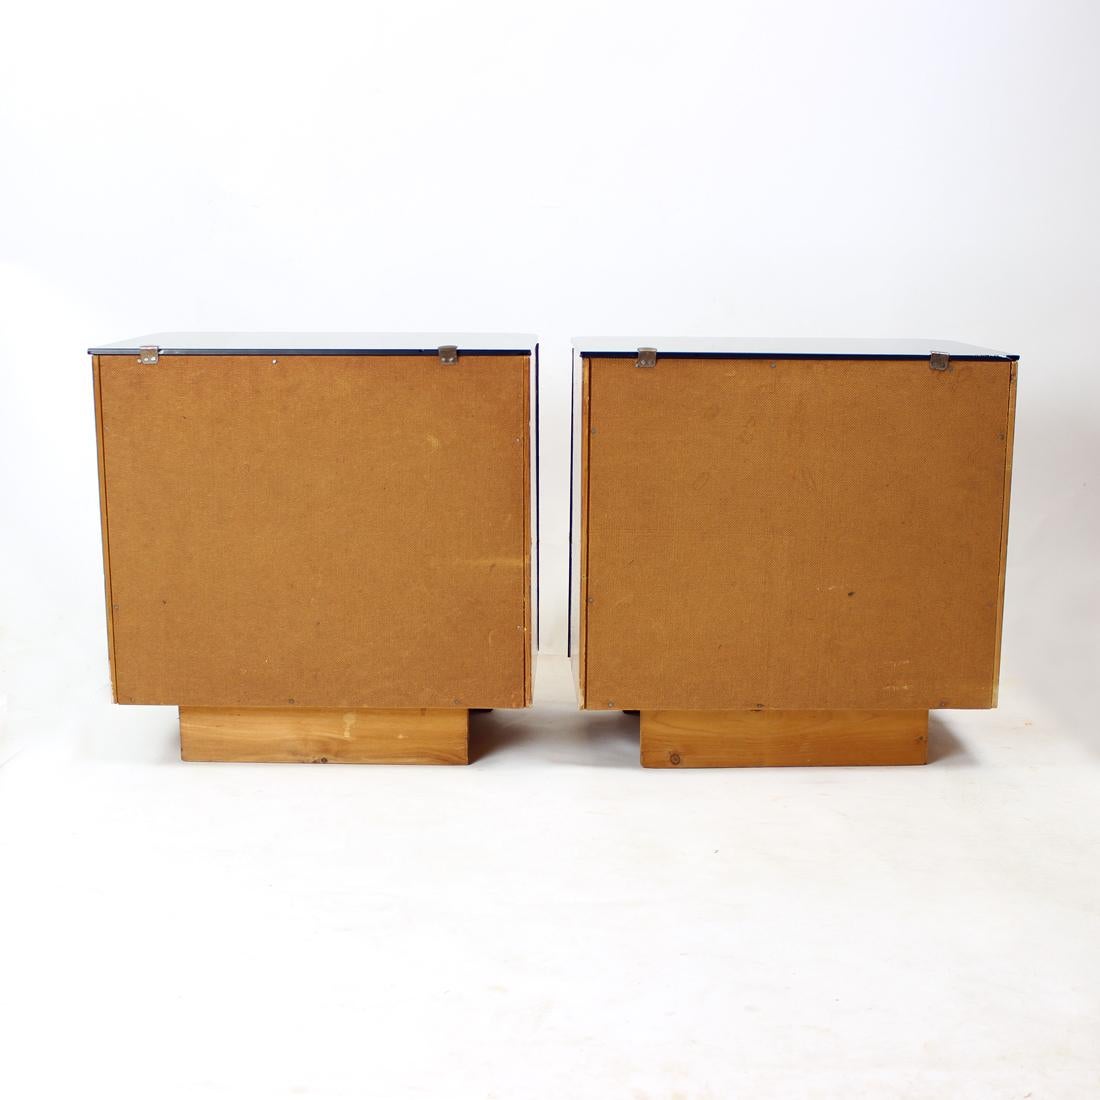 Set of Two Bedside Tables in Wood & Glass, Czechoslovakia, 1940s For Sale 5